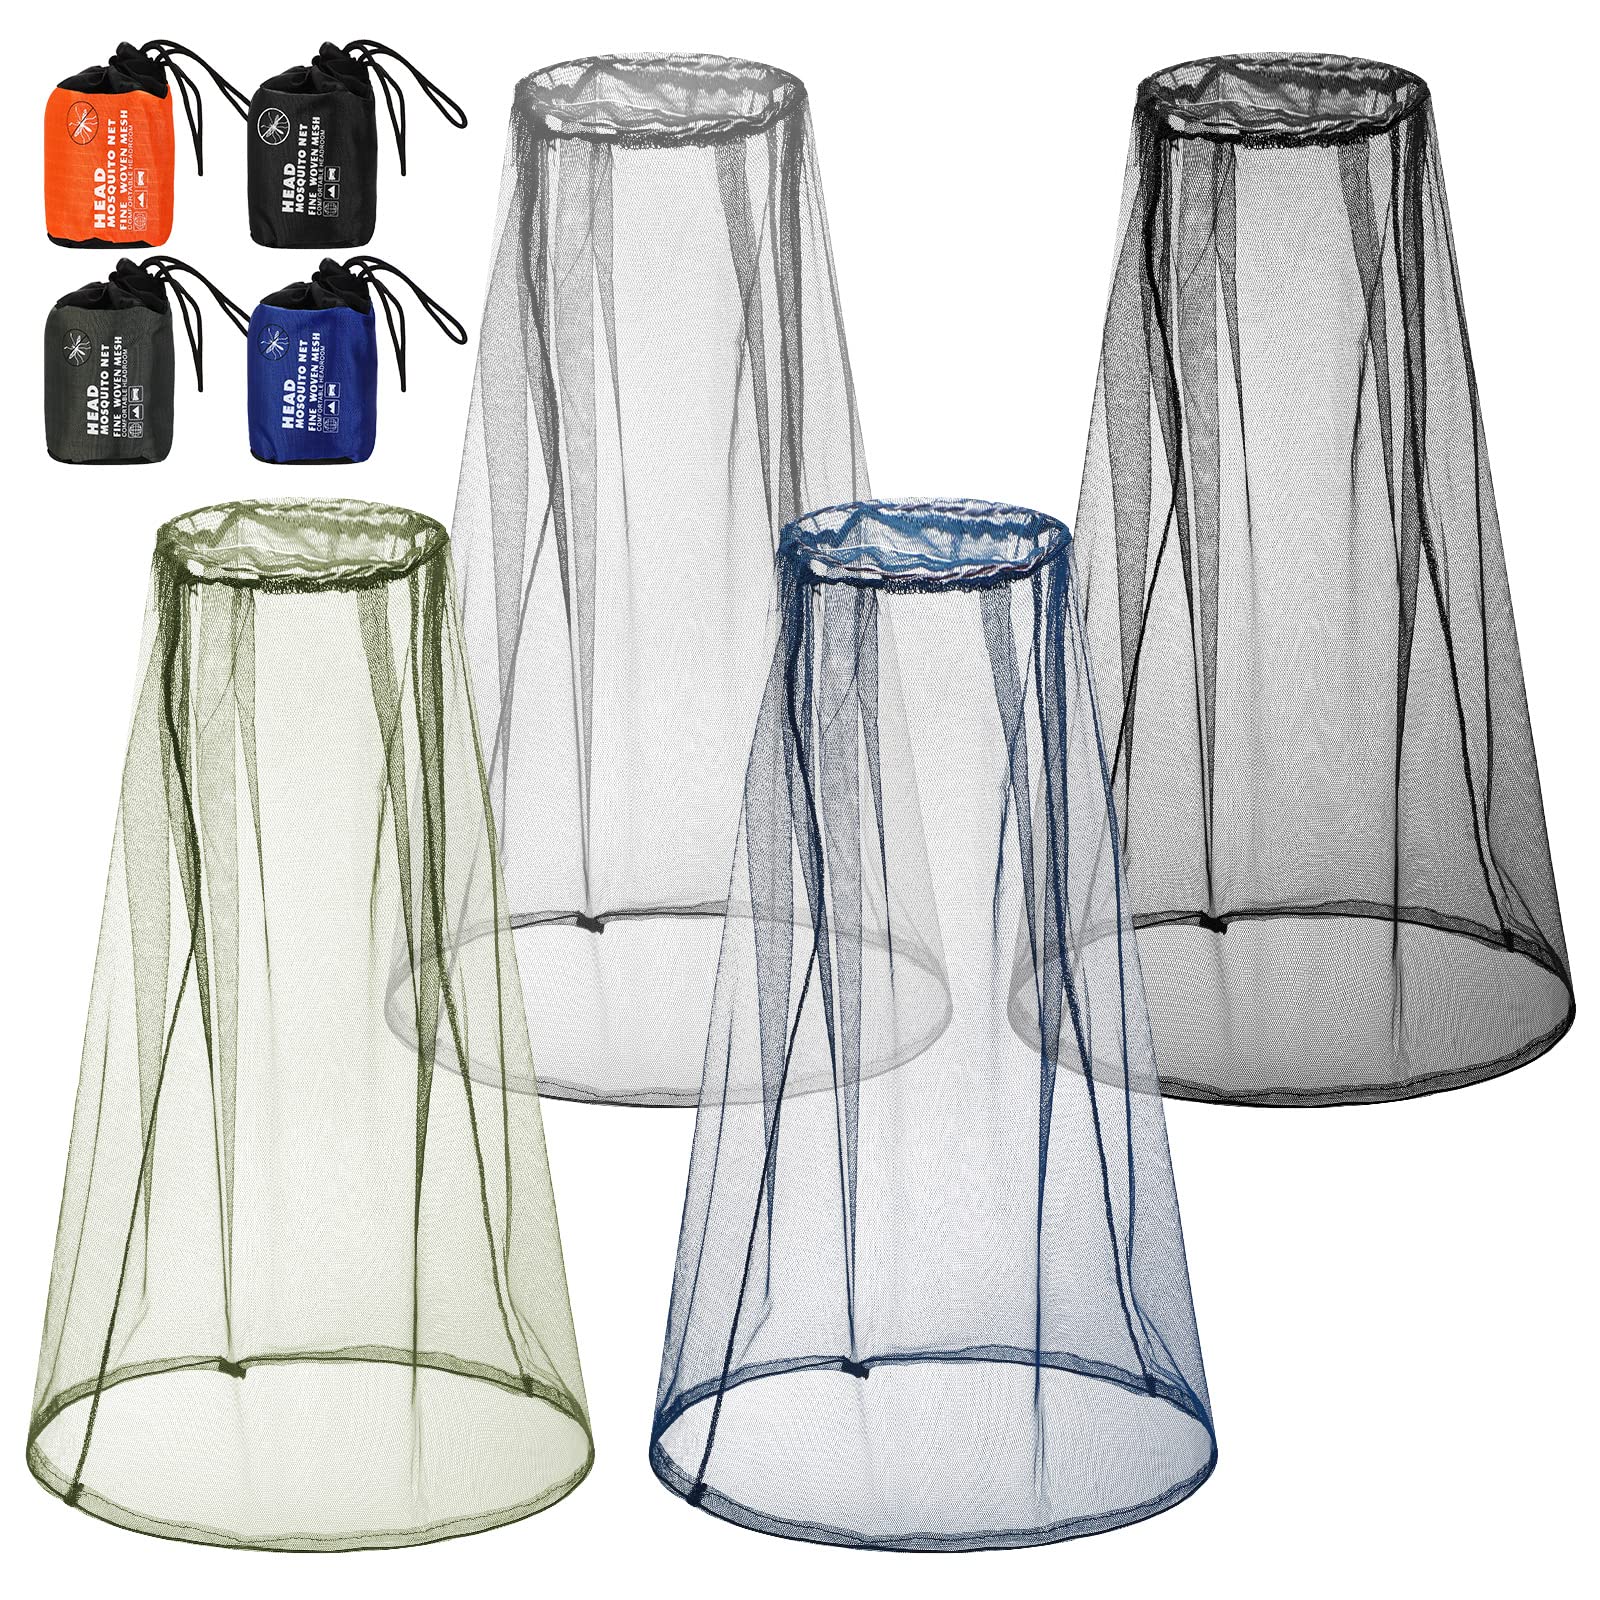 4 Pack Mosquito Head Net Face Mesh Net Head Protecting Net for Outdoor  Hiking Camping Climbing